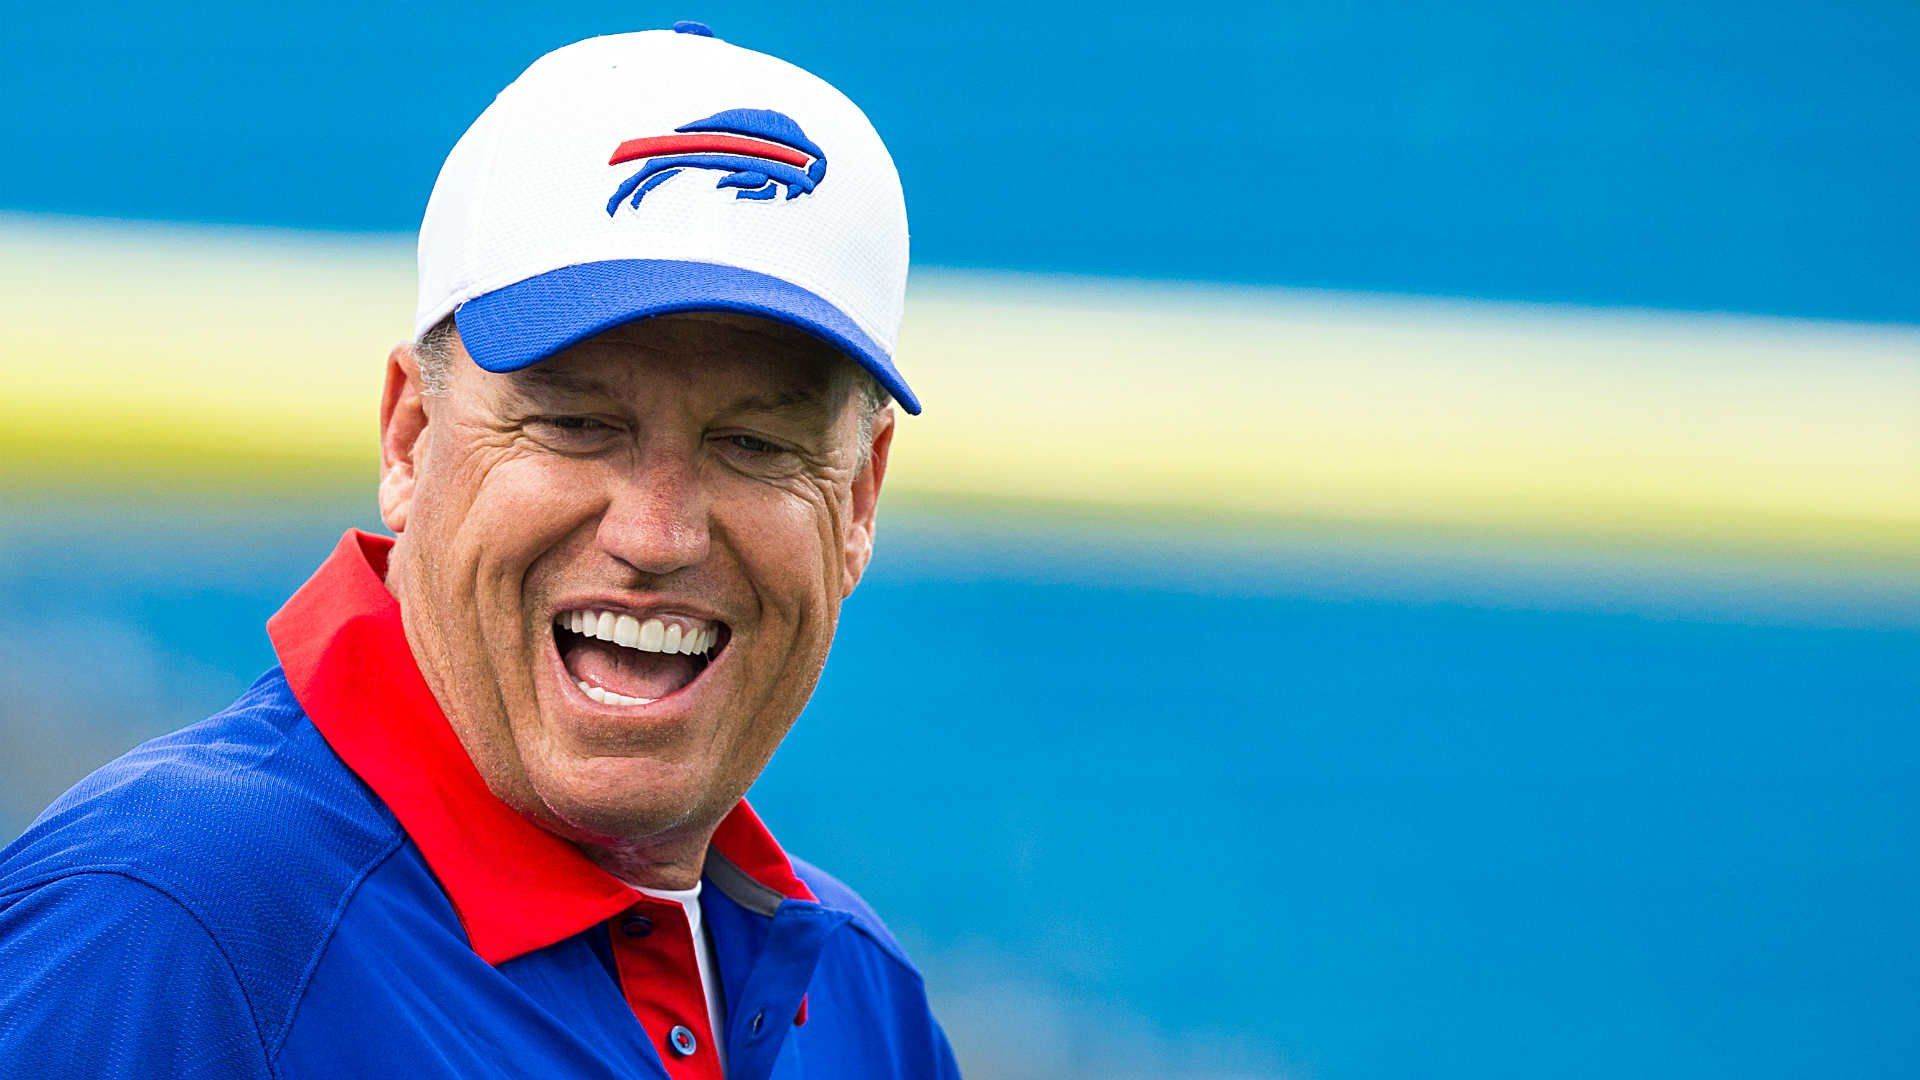 Funny rex ryan pictures